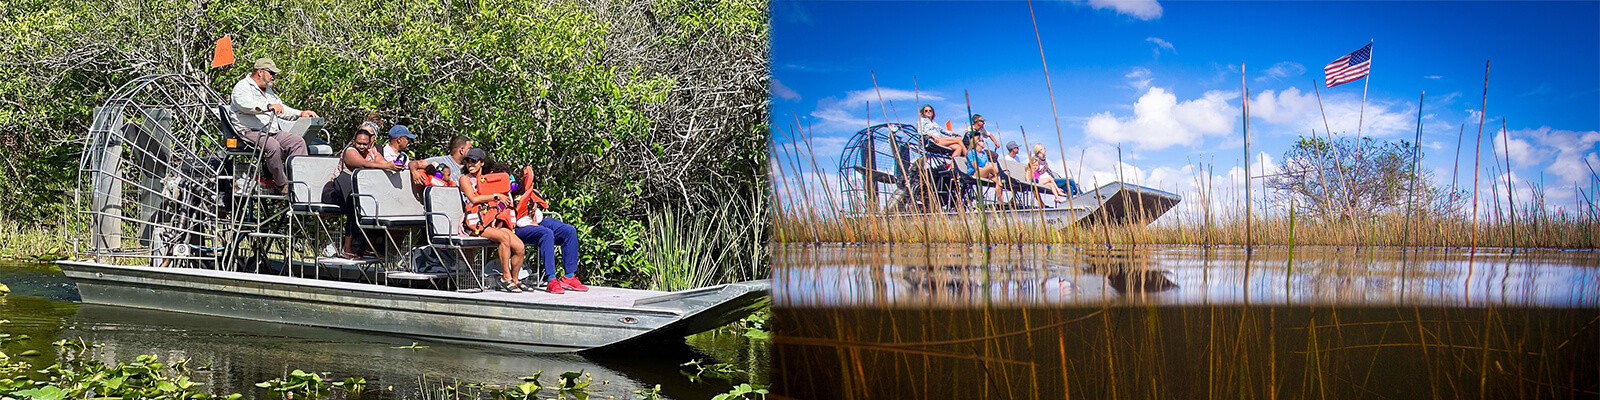 Gator Park Airboat Tours Coupons